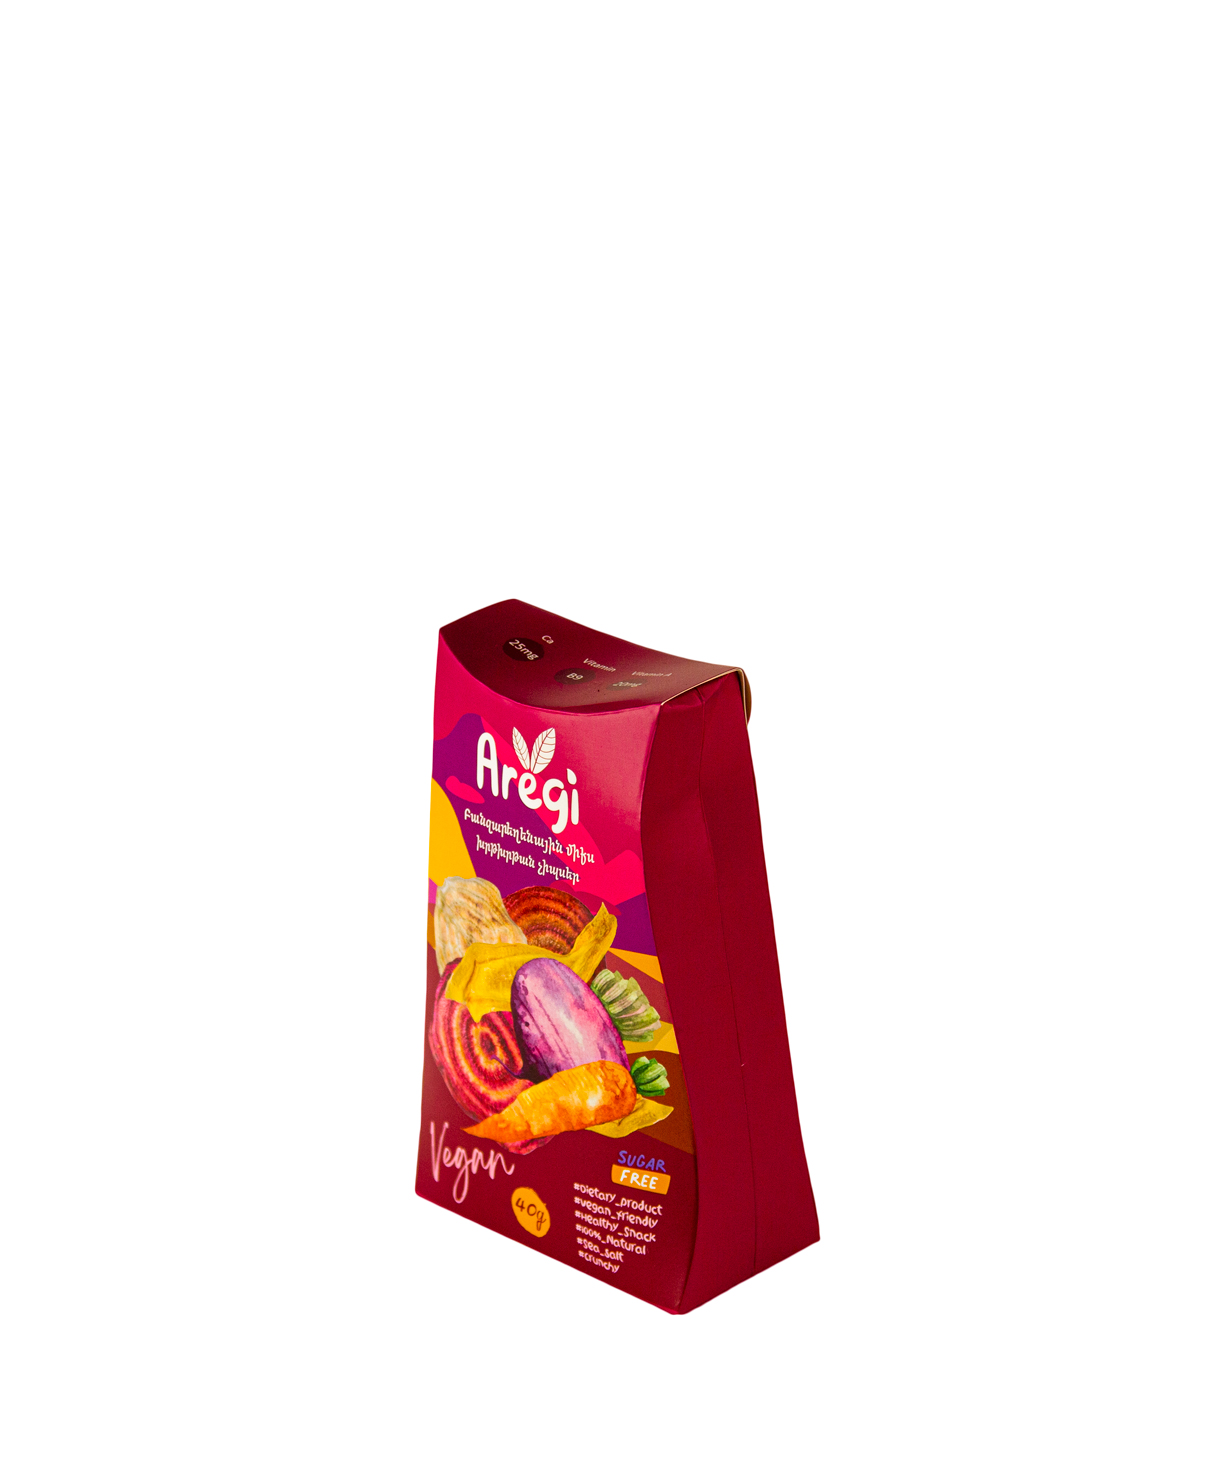 Dried `Aregi` vegetable chips mix